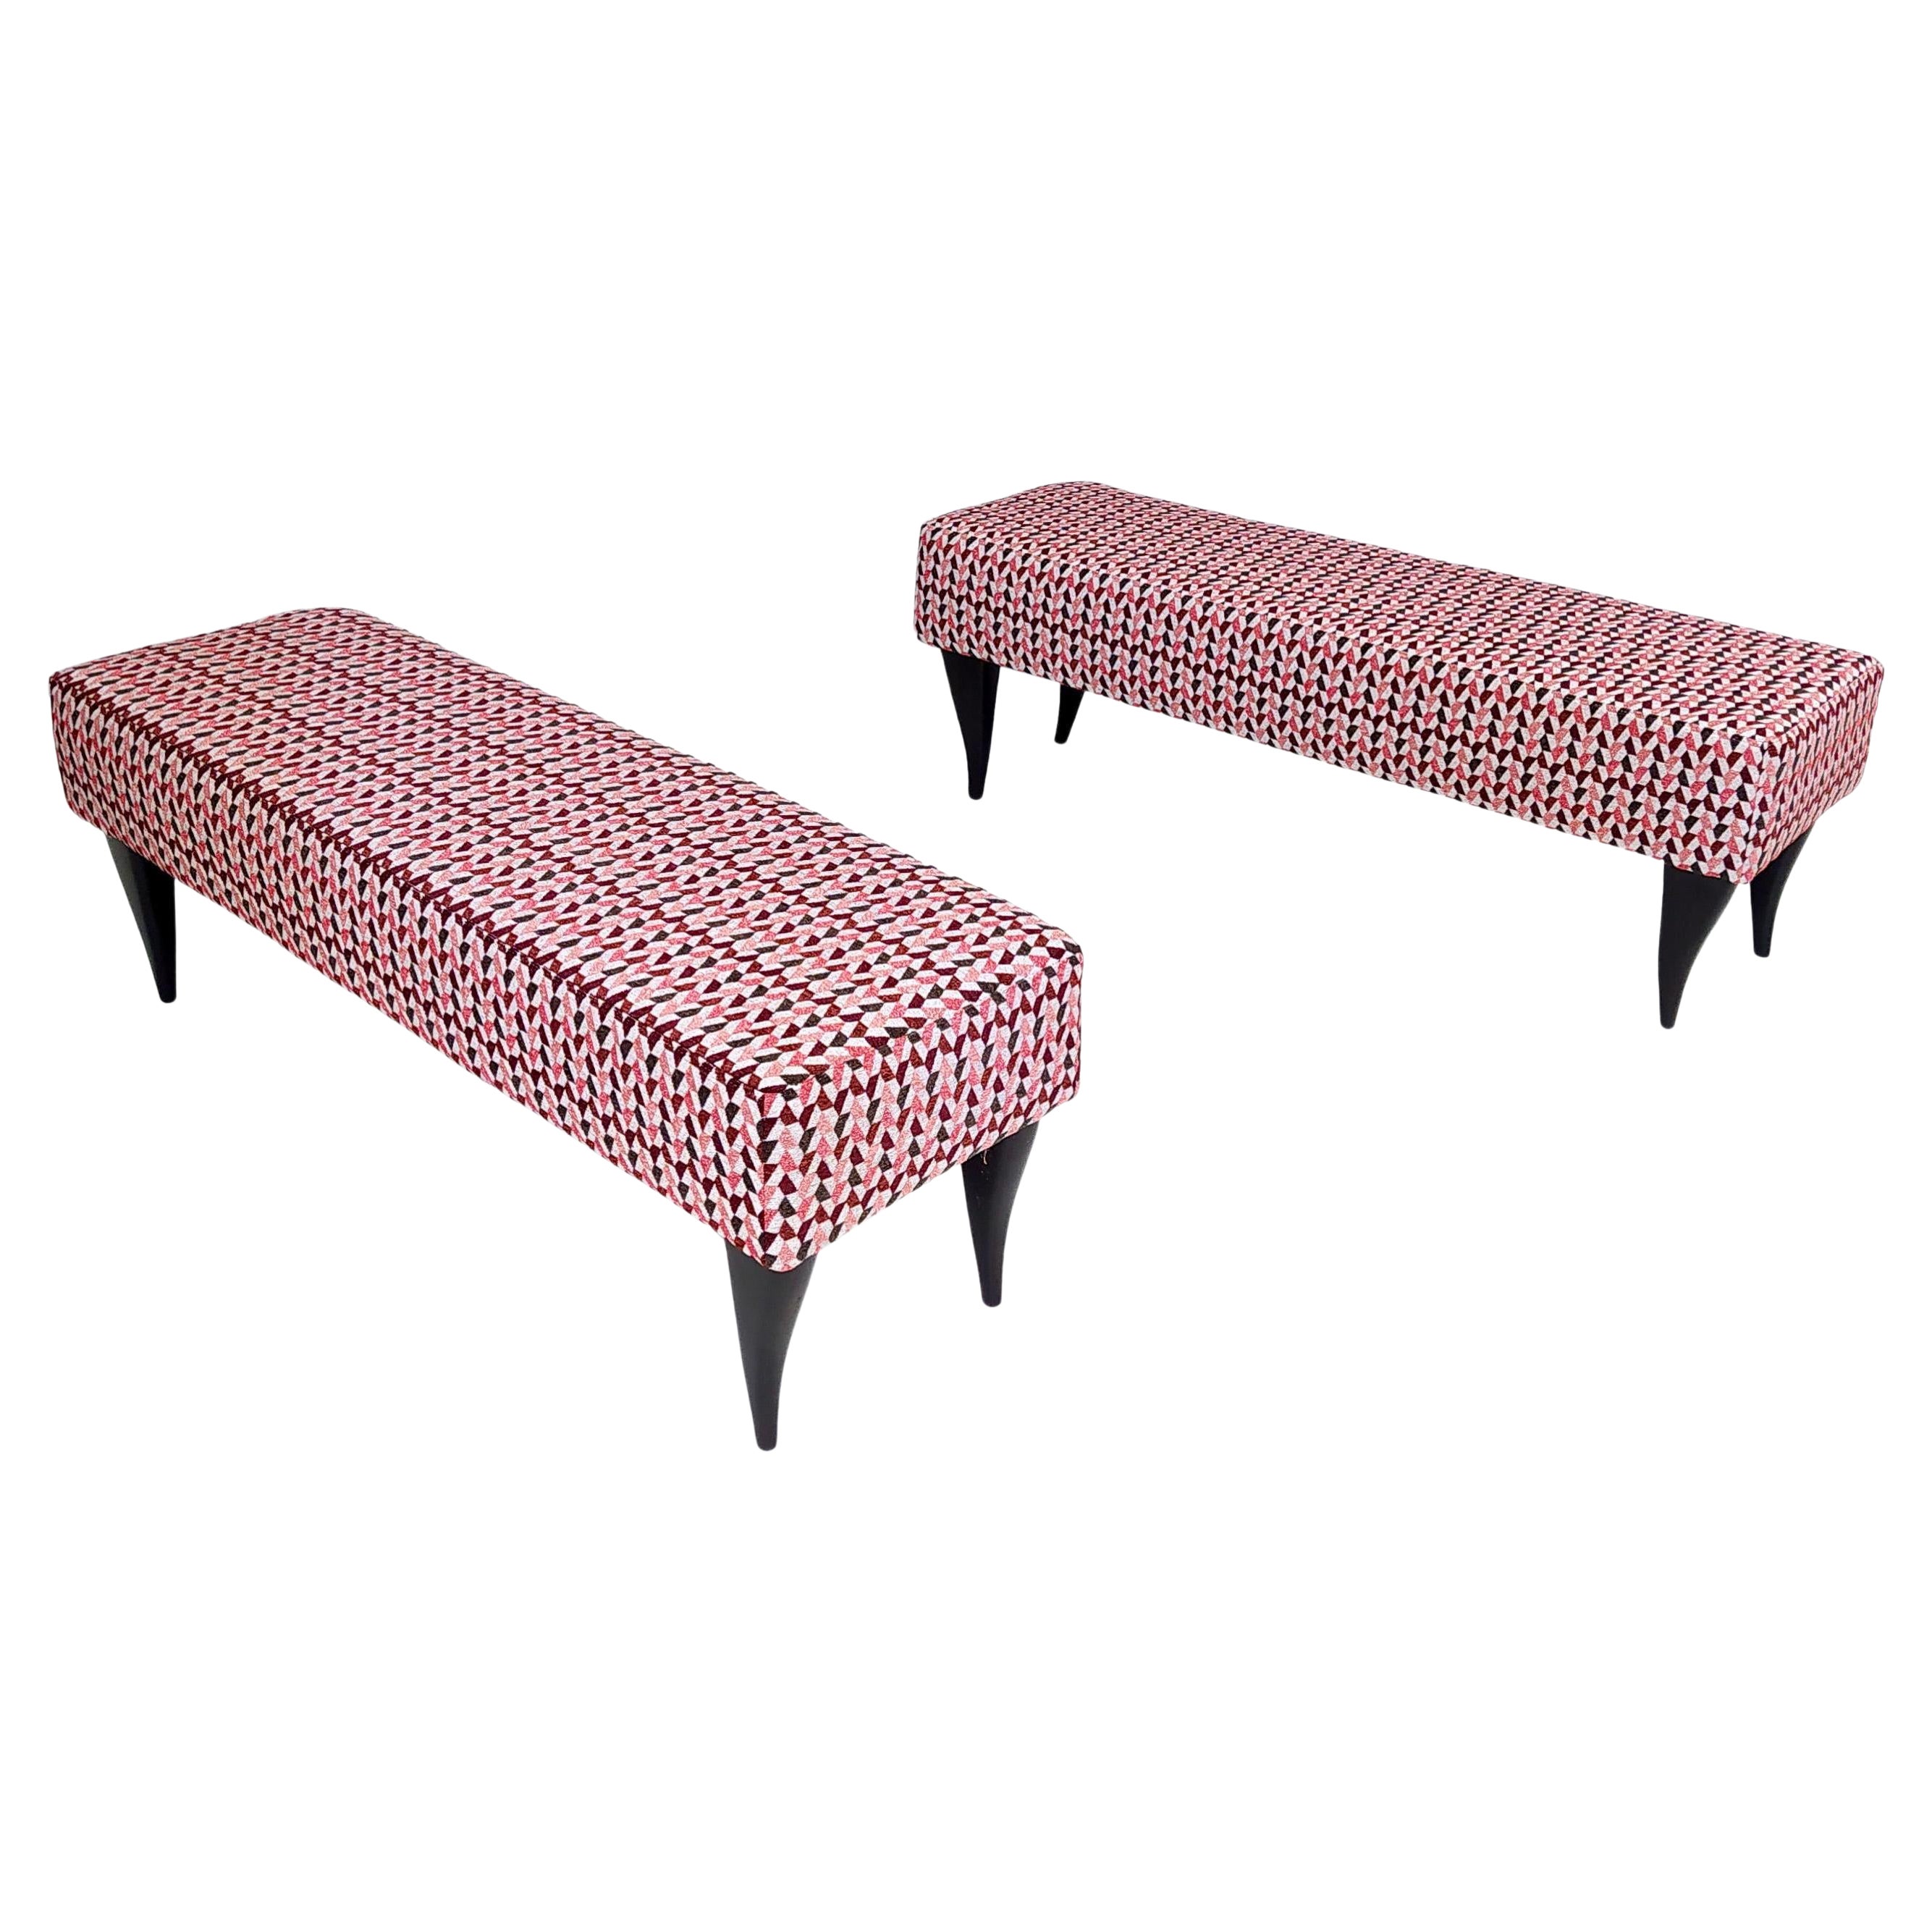 Pair of Vintage Benches with Red Patterned Fabric Upholstery, Italy For Sale